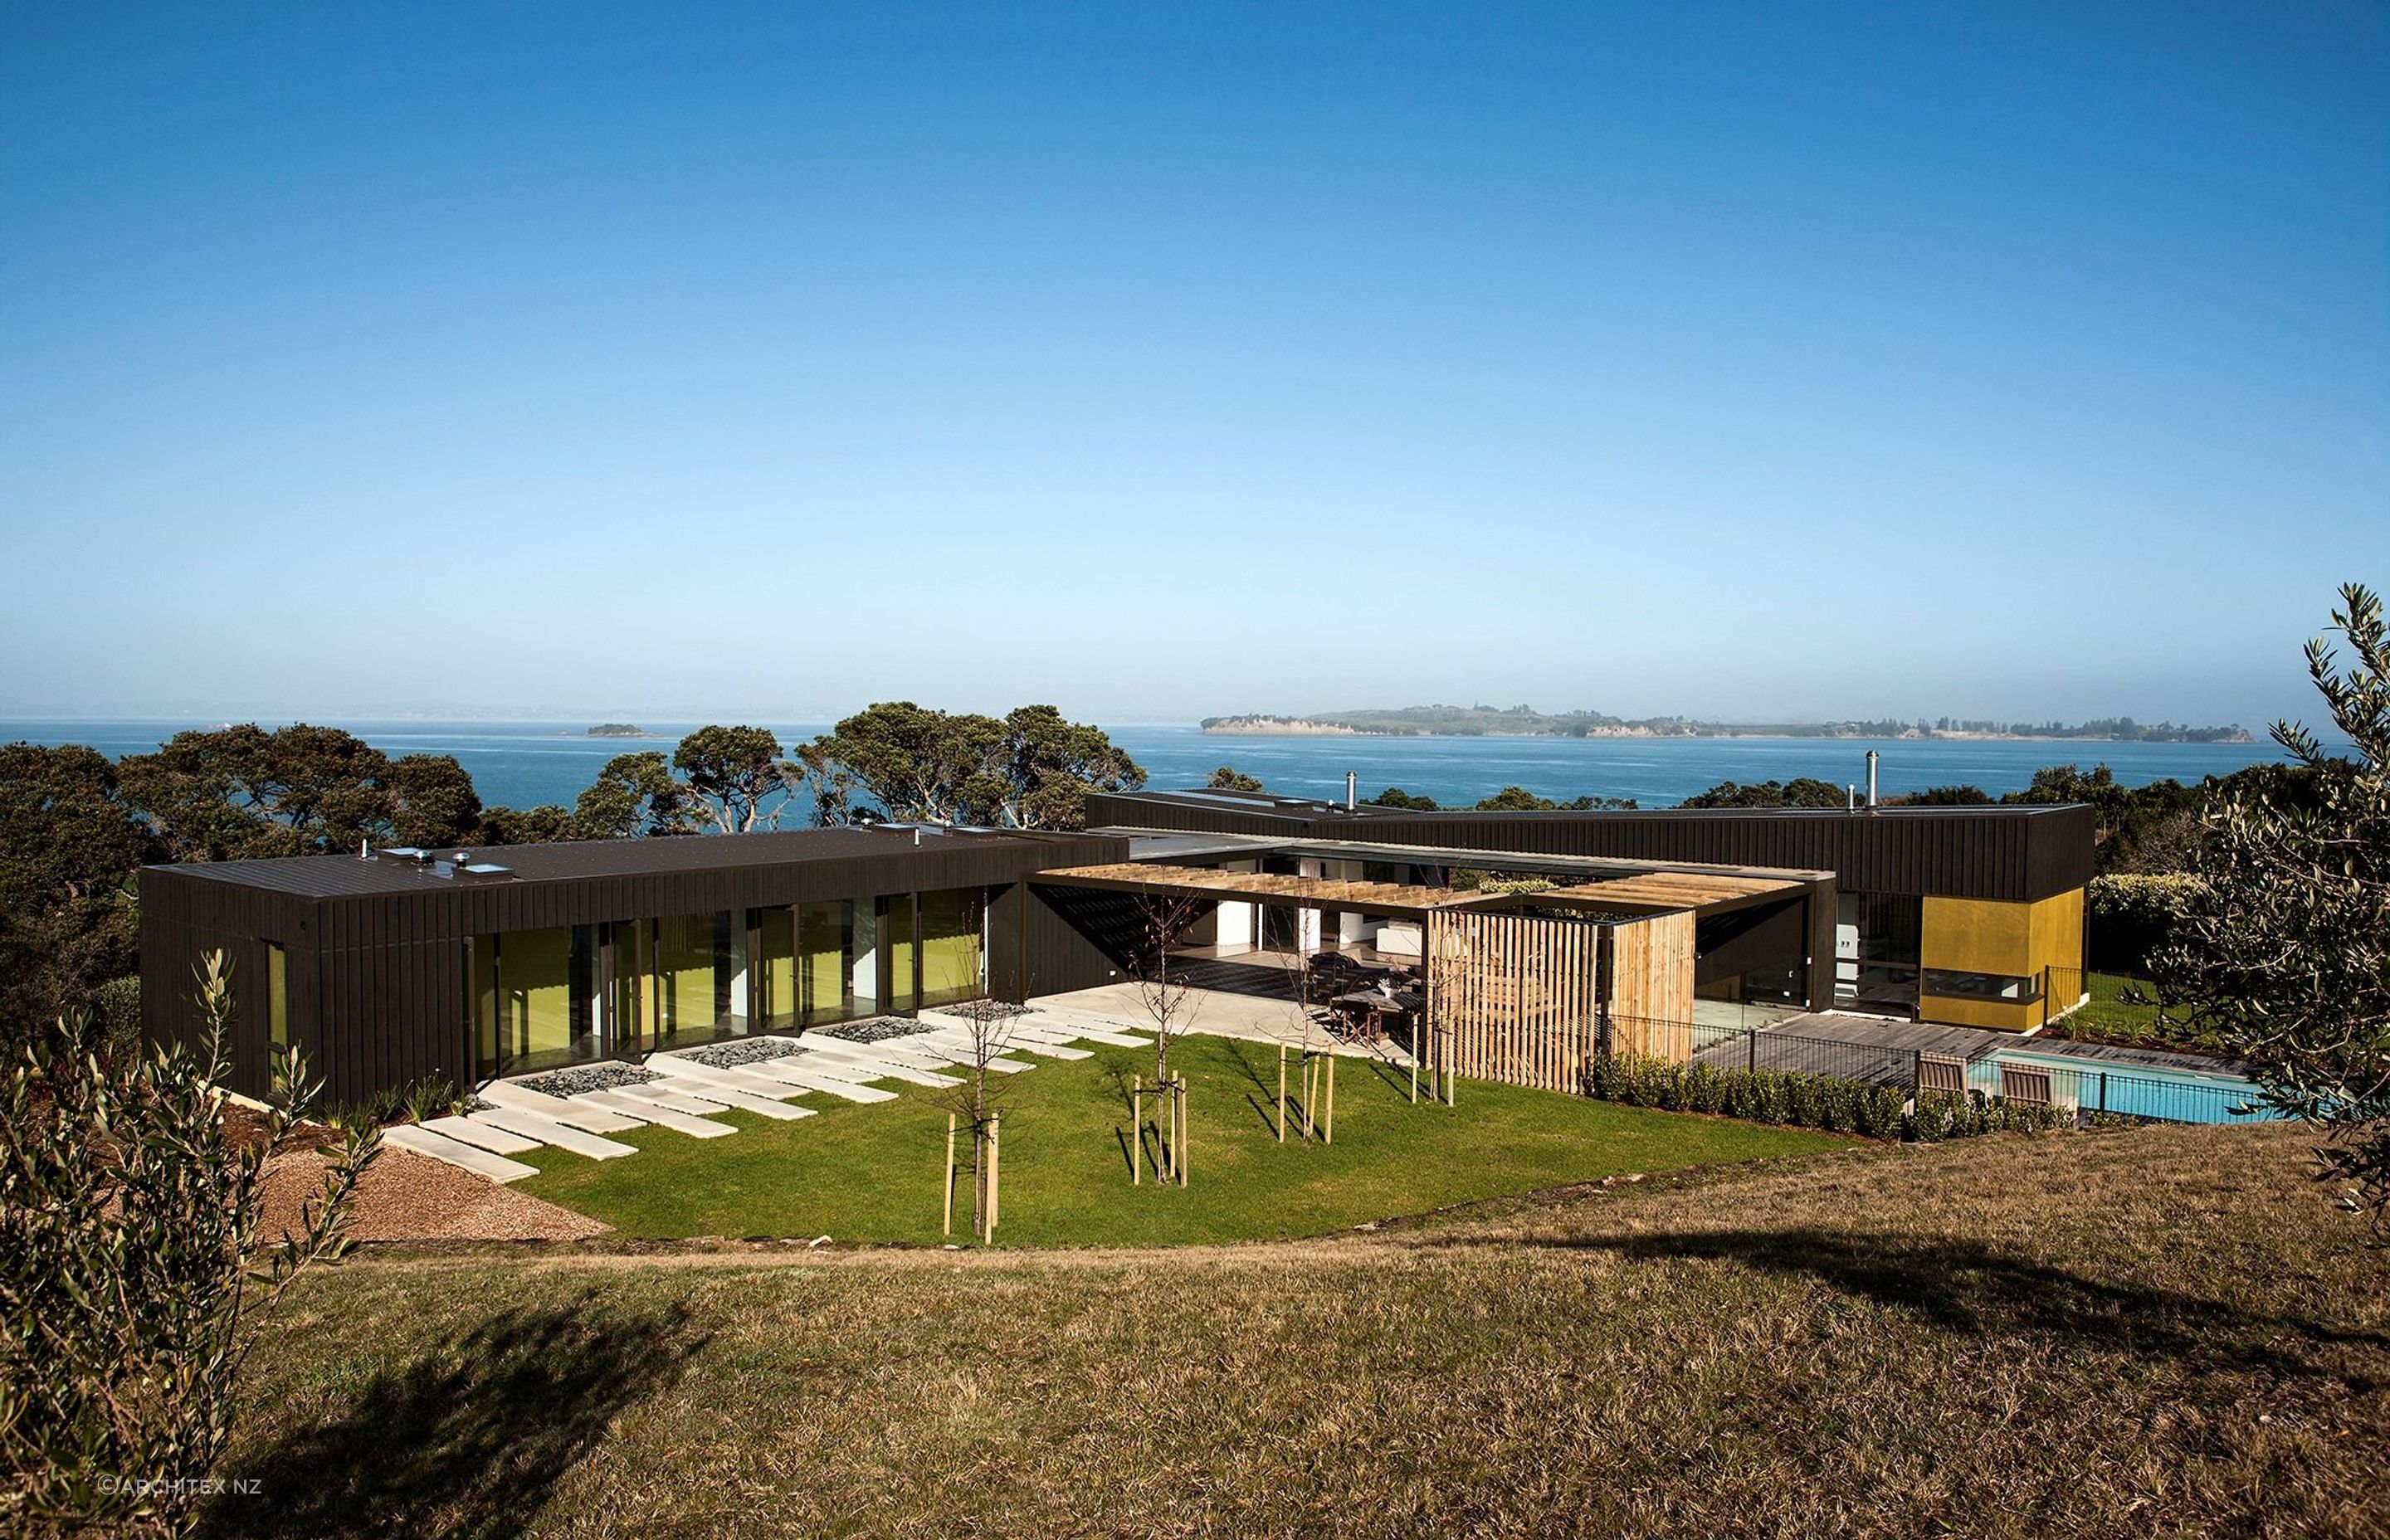 The perfect Kiwi summer house with an equally stunning view of the Hauraki Gulf.